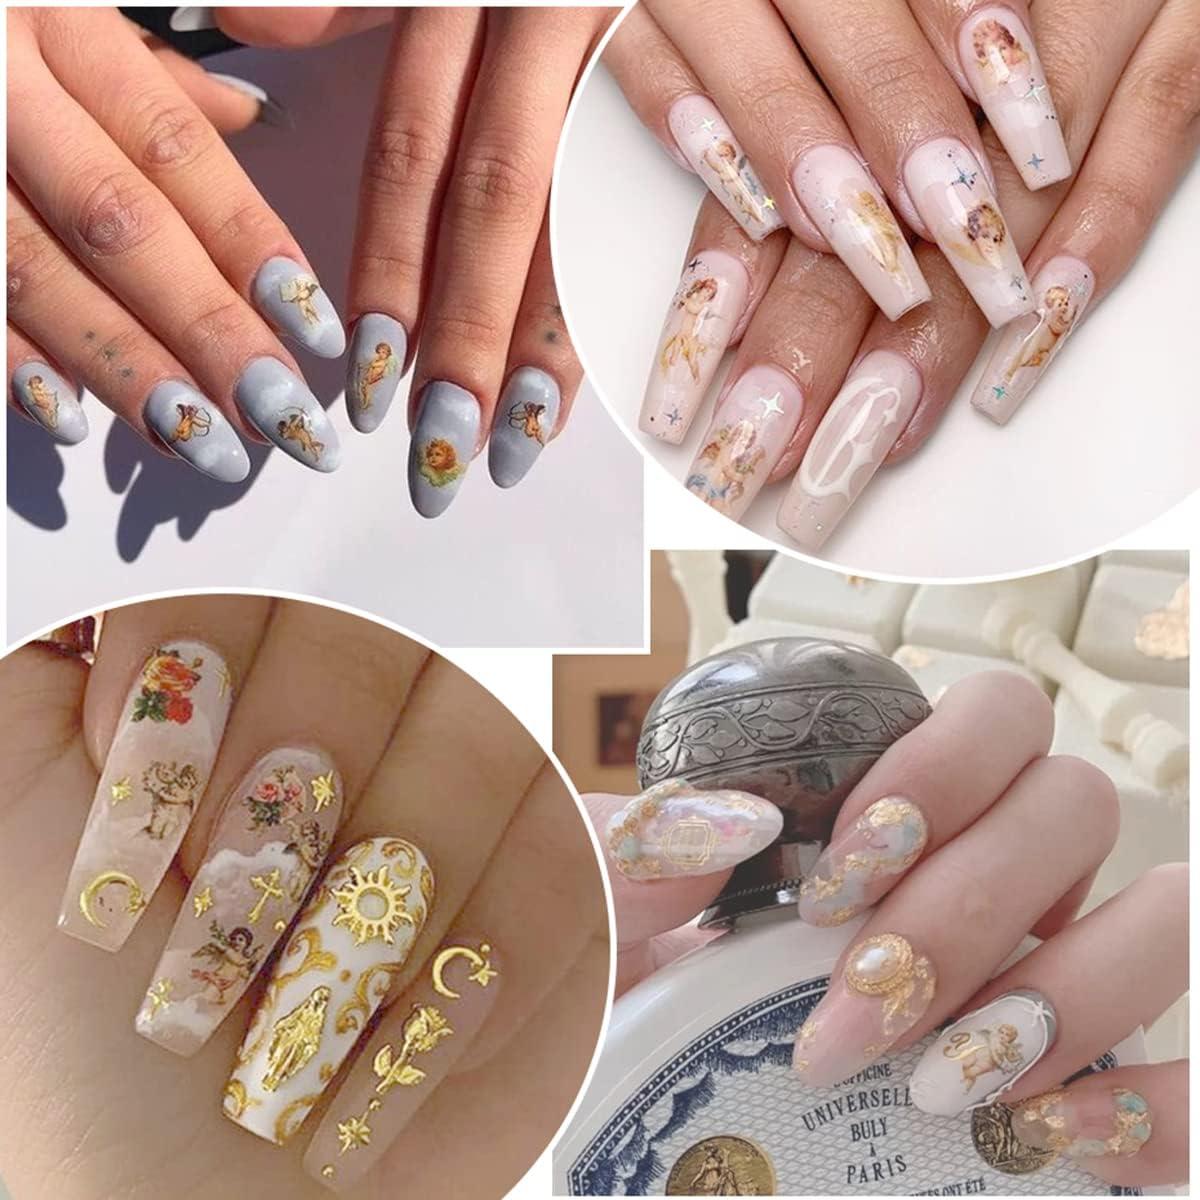 Holy Nails! (@holynailsmat) • Instagram photos and videos